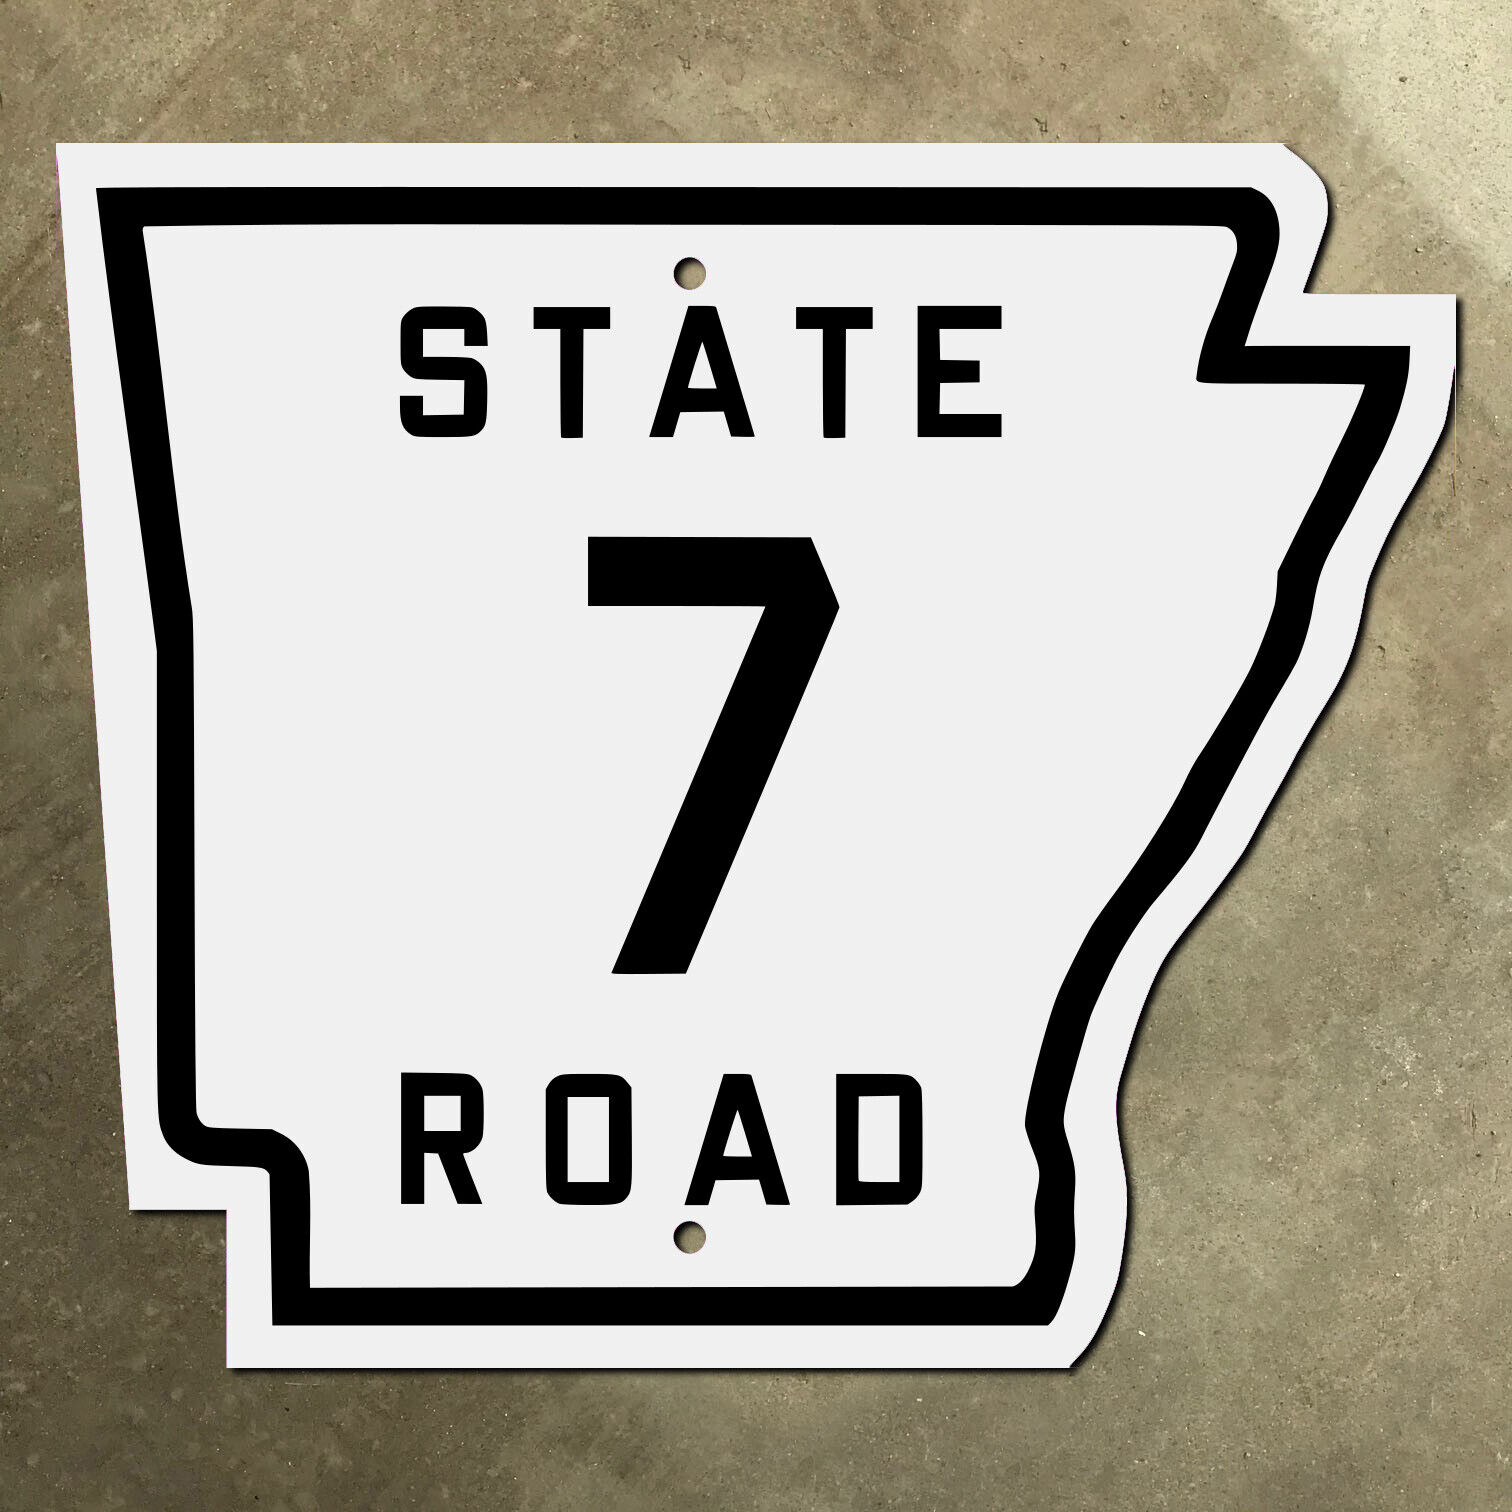 Arkansas state route 7 highway marker road sign 1920s 1930s